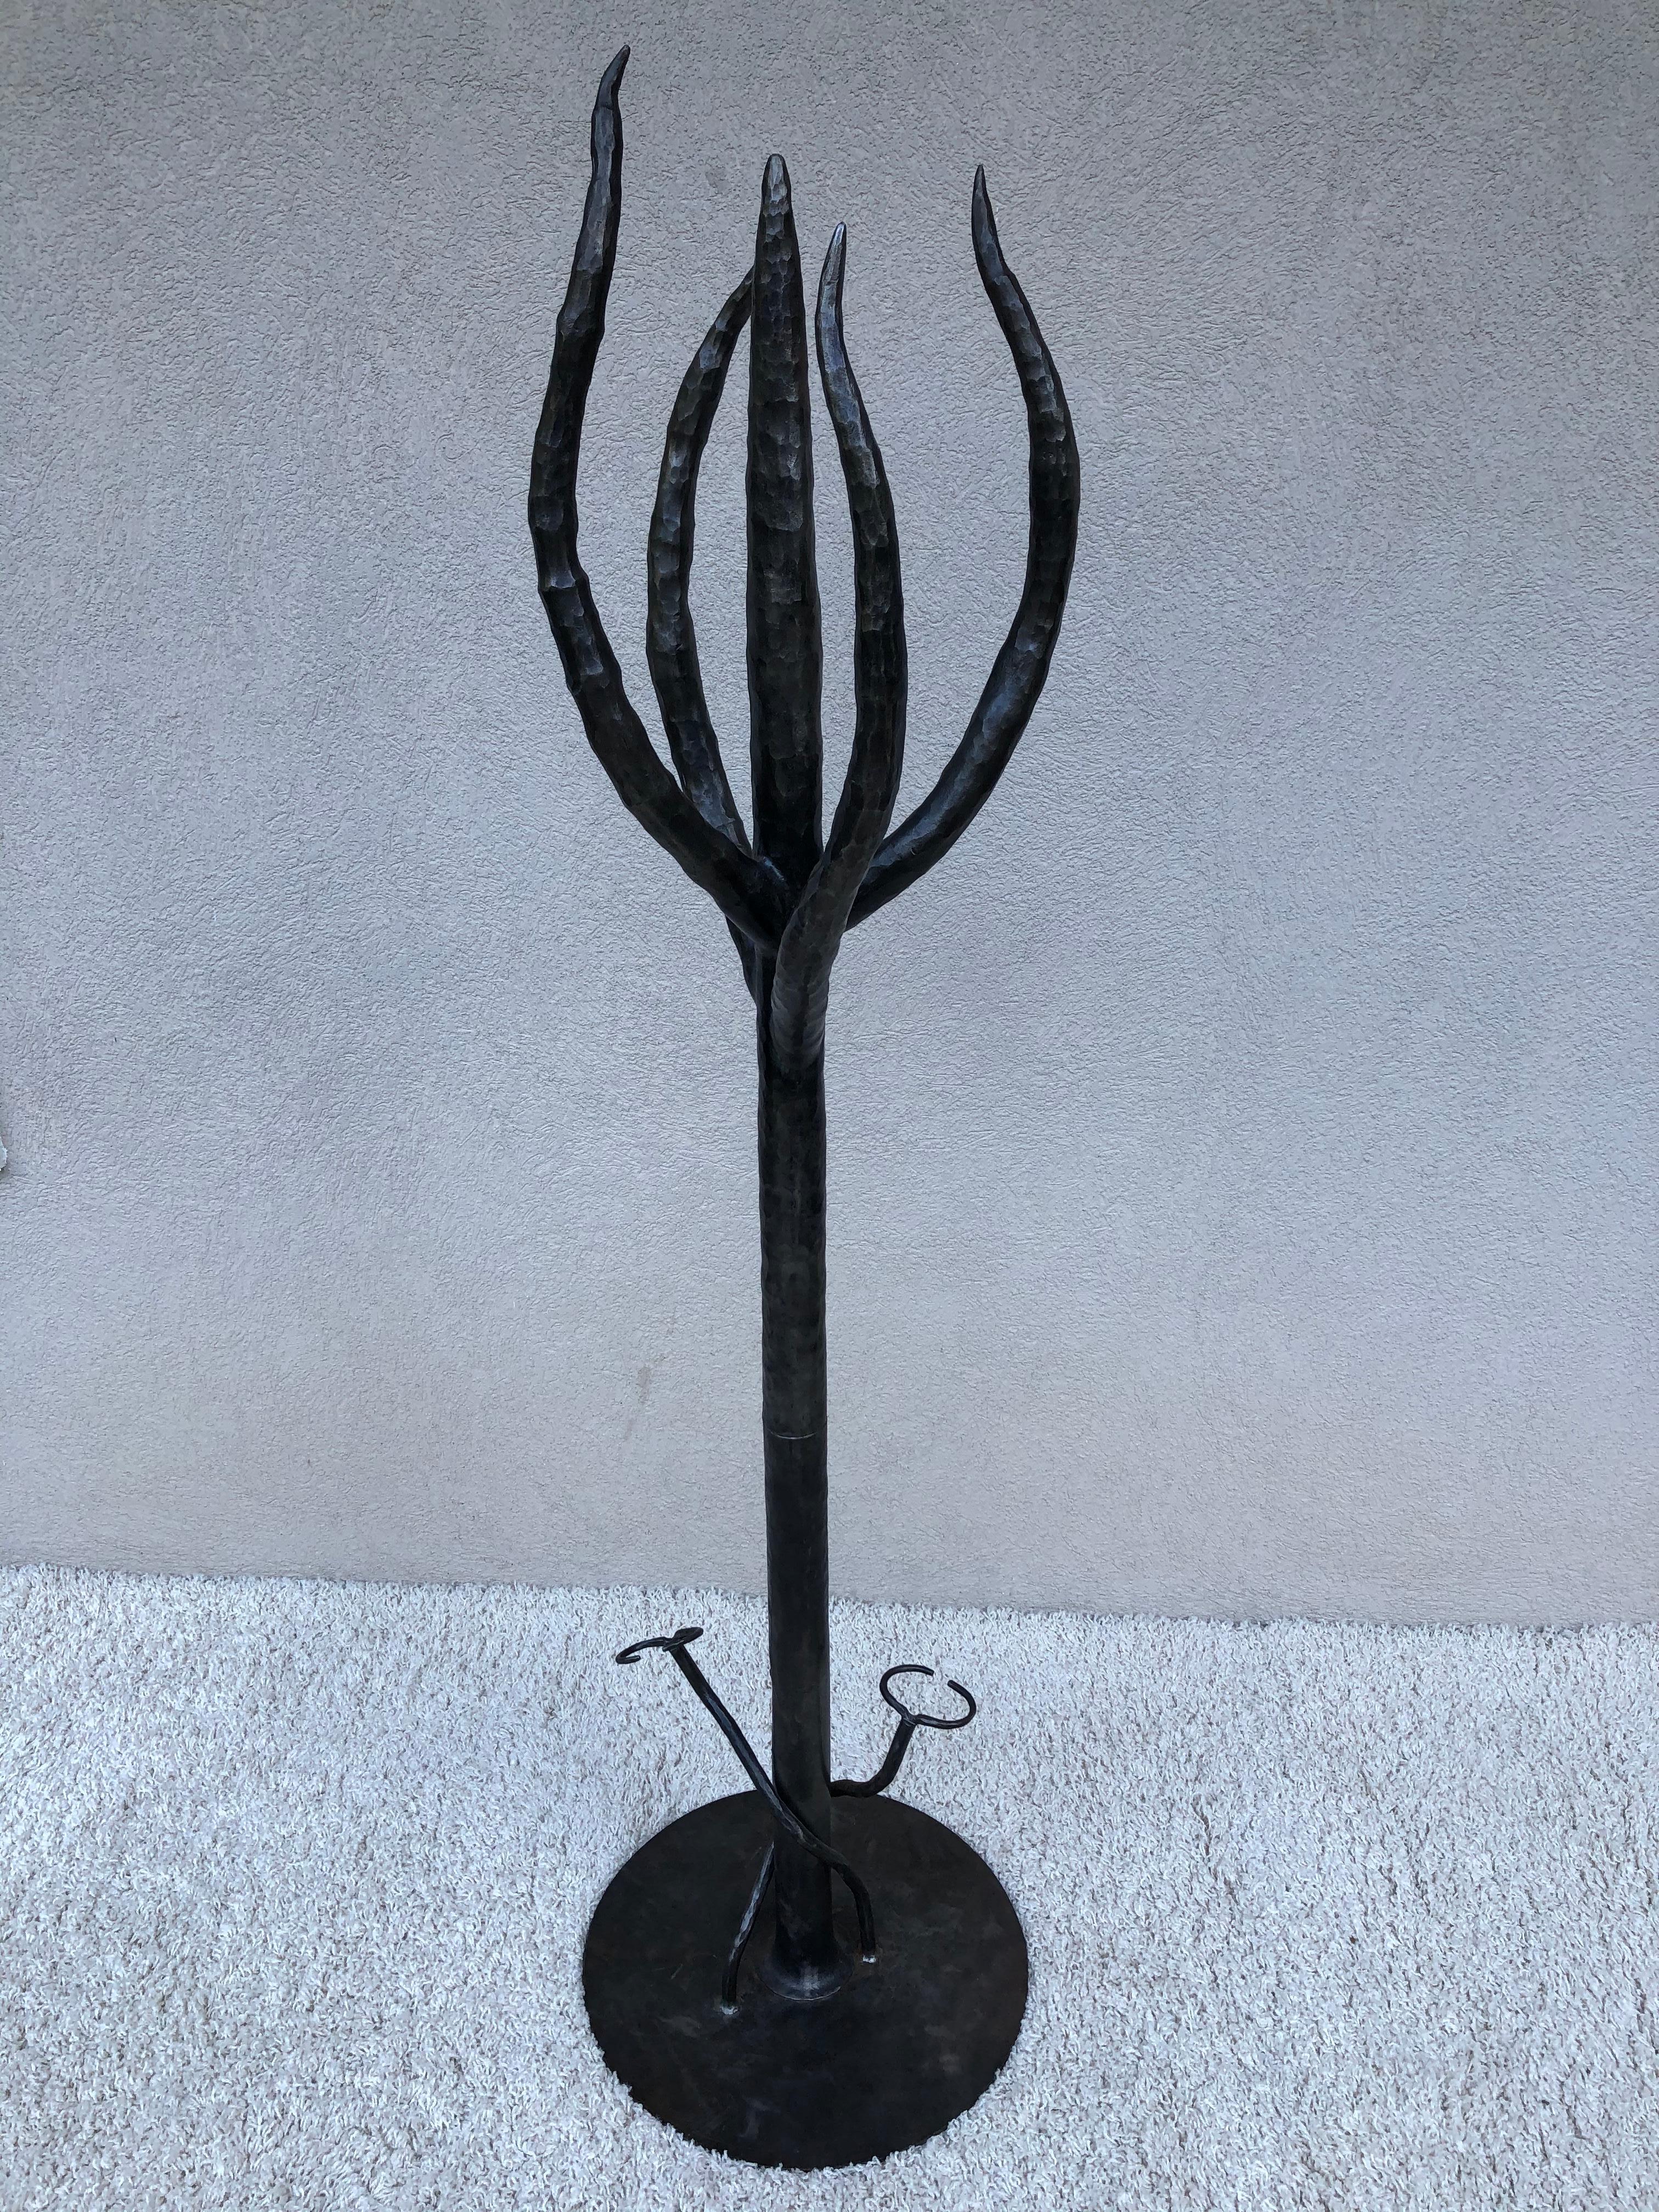 Handwrought iron and steel cactus sculpture coat rack umbrella stand, all in heavy gauge iron hand-hammered, dark charcoal grey and iron patina, in very fine condition. Made in two sections.